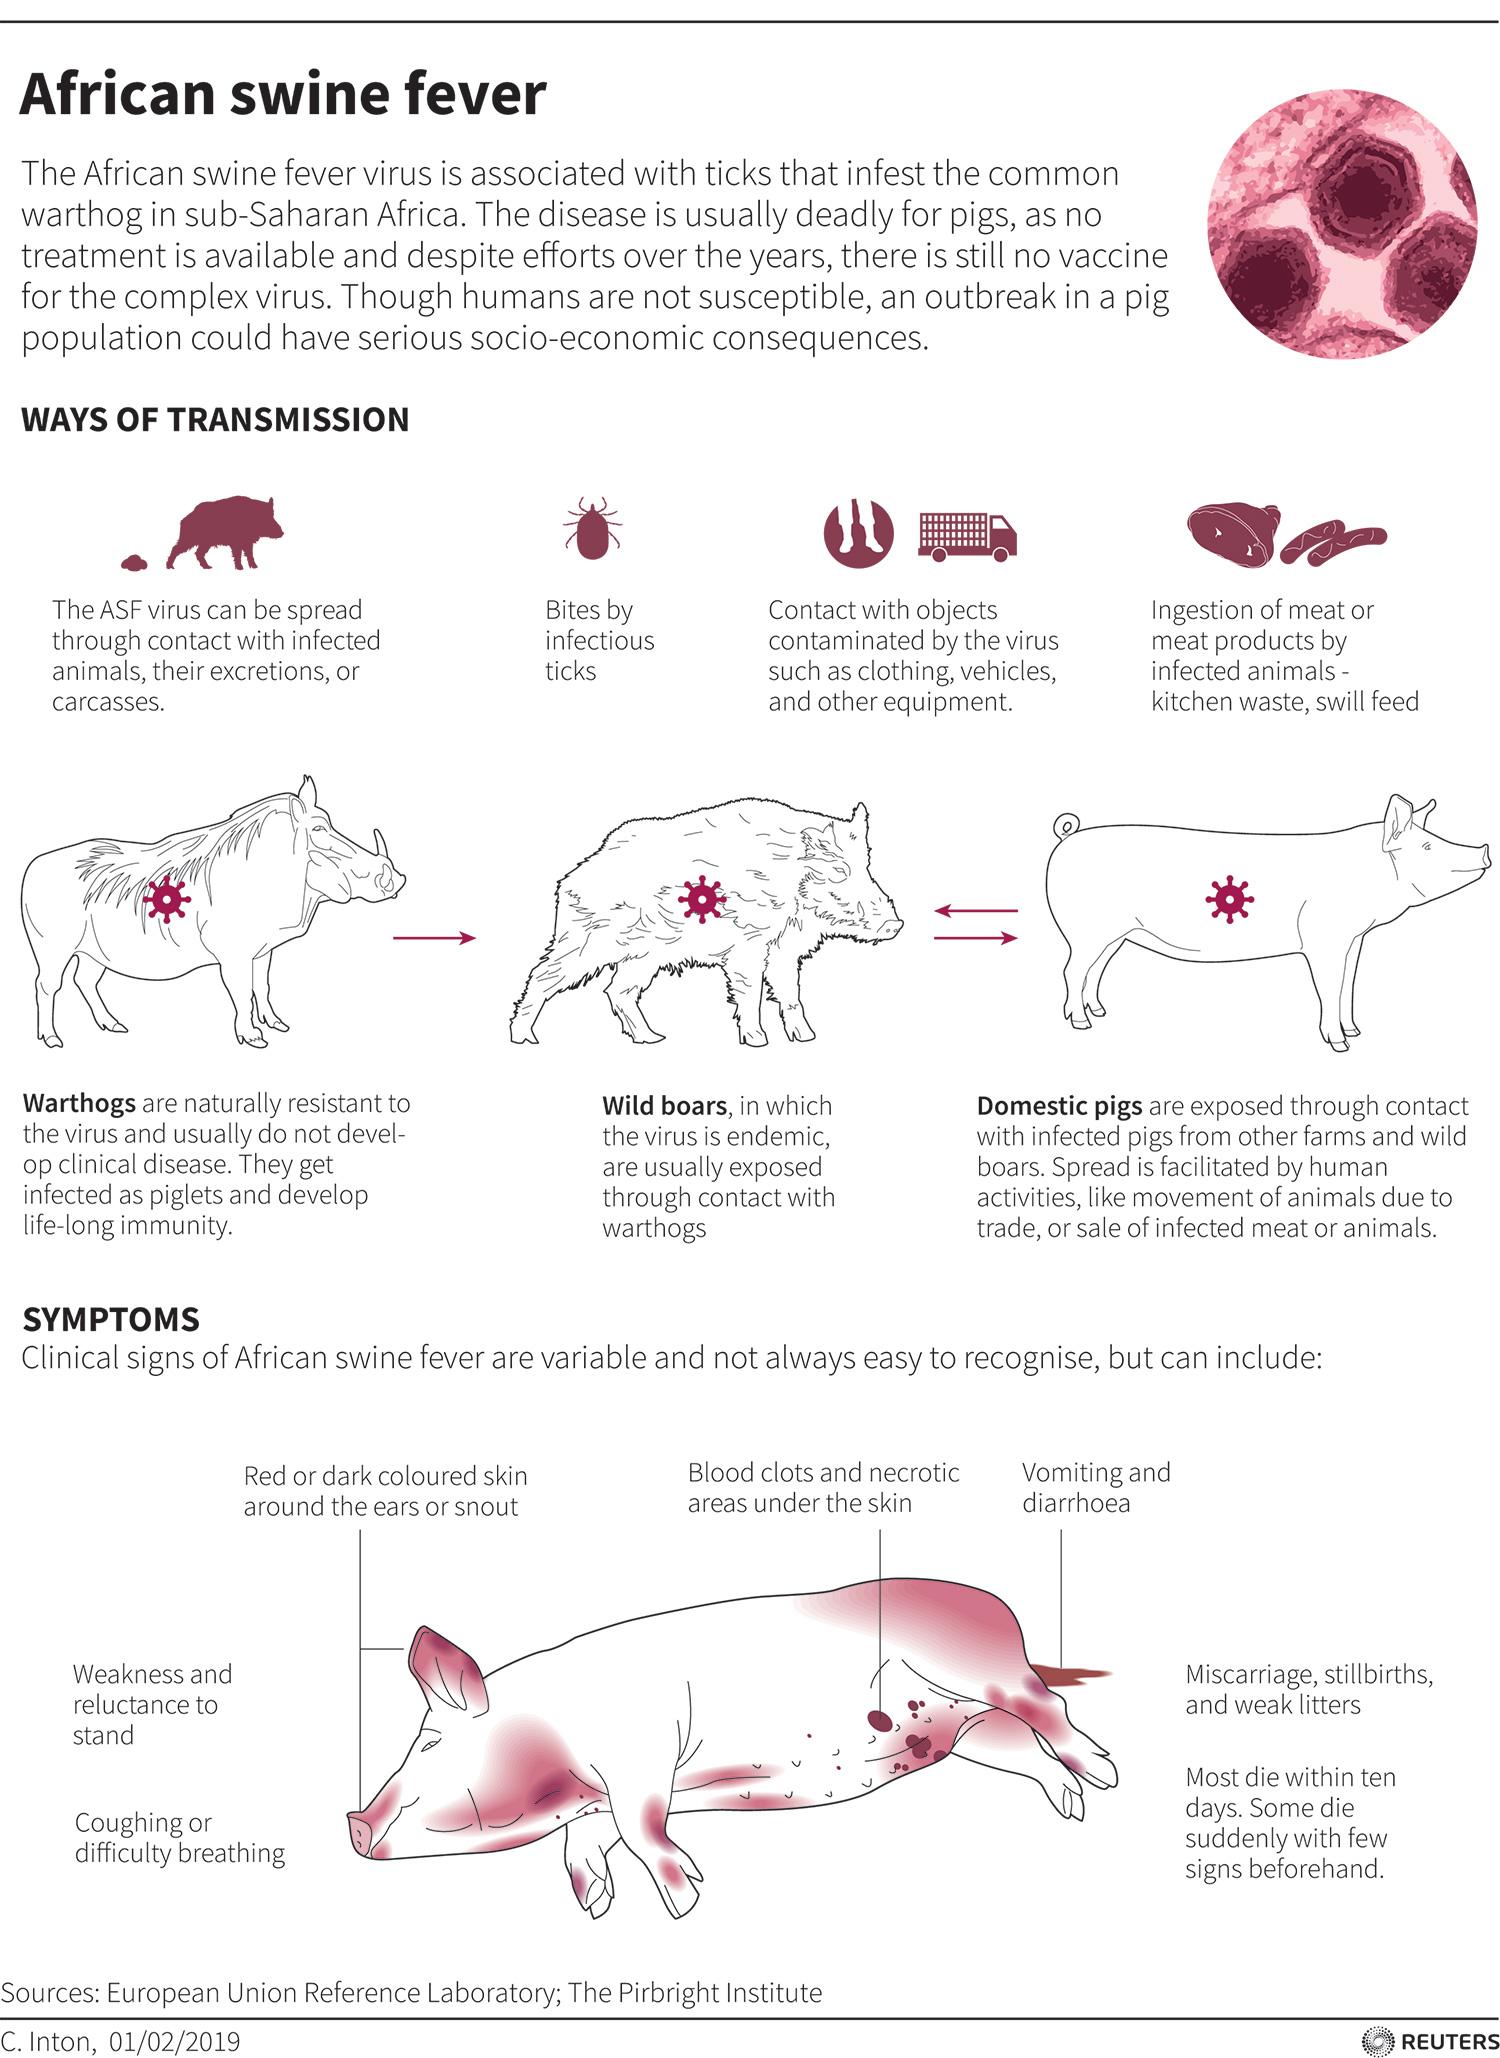 African swine fever. The image shows a graphic explainer on the disease and how it infects warthogs, wild boar, and domestic pigs.